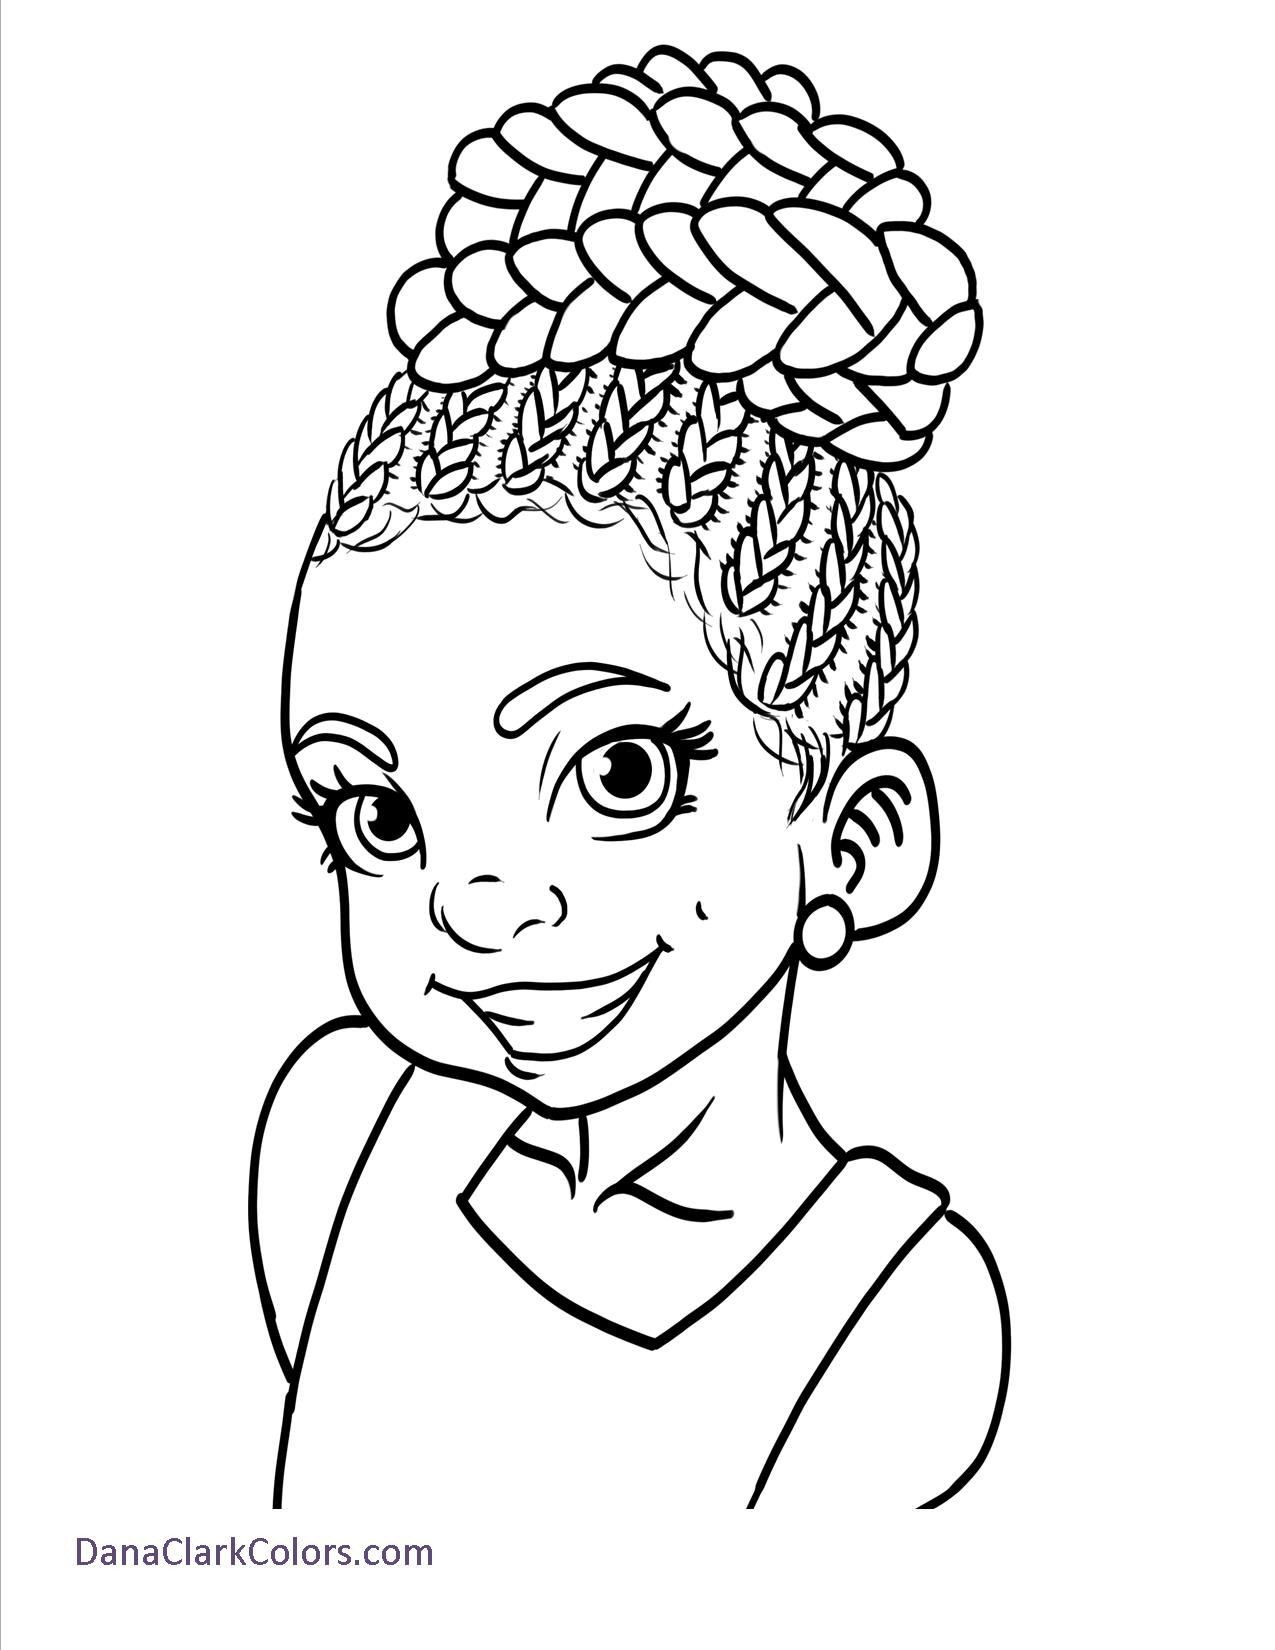 African American Boys Coloring Sheets
 Free African American Children s Coloring Pages